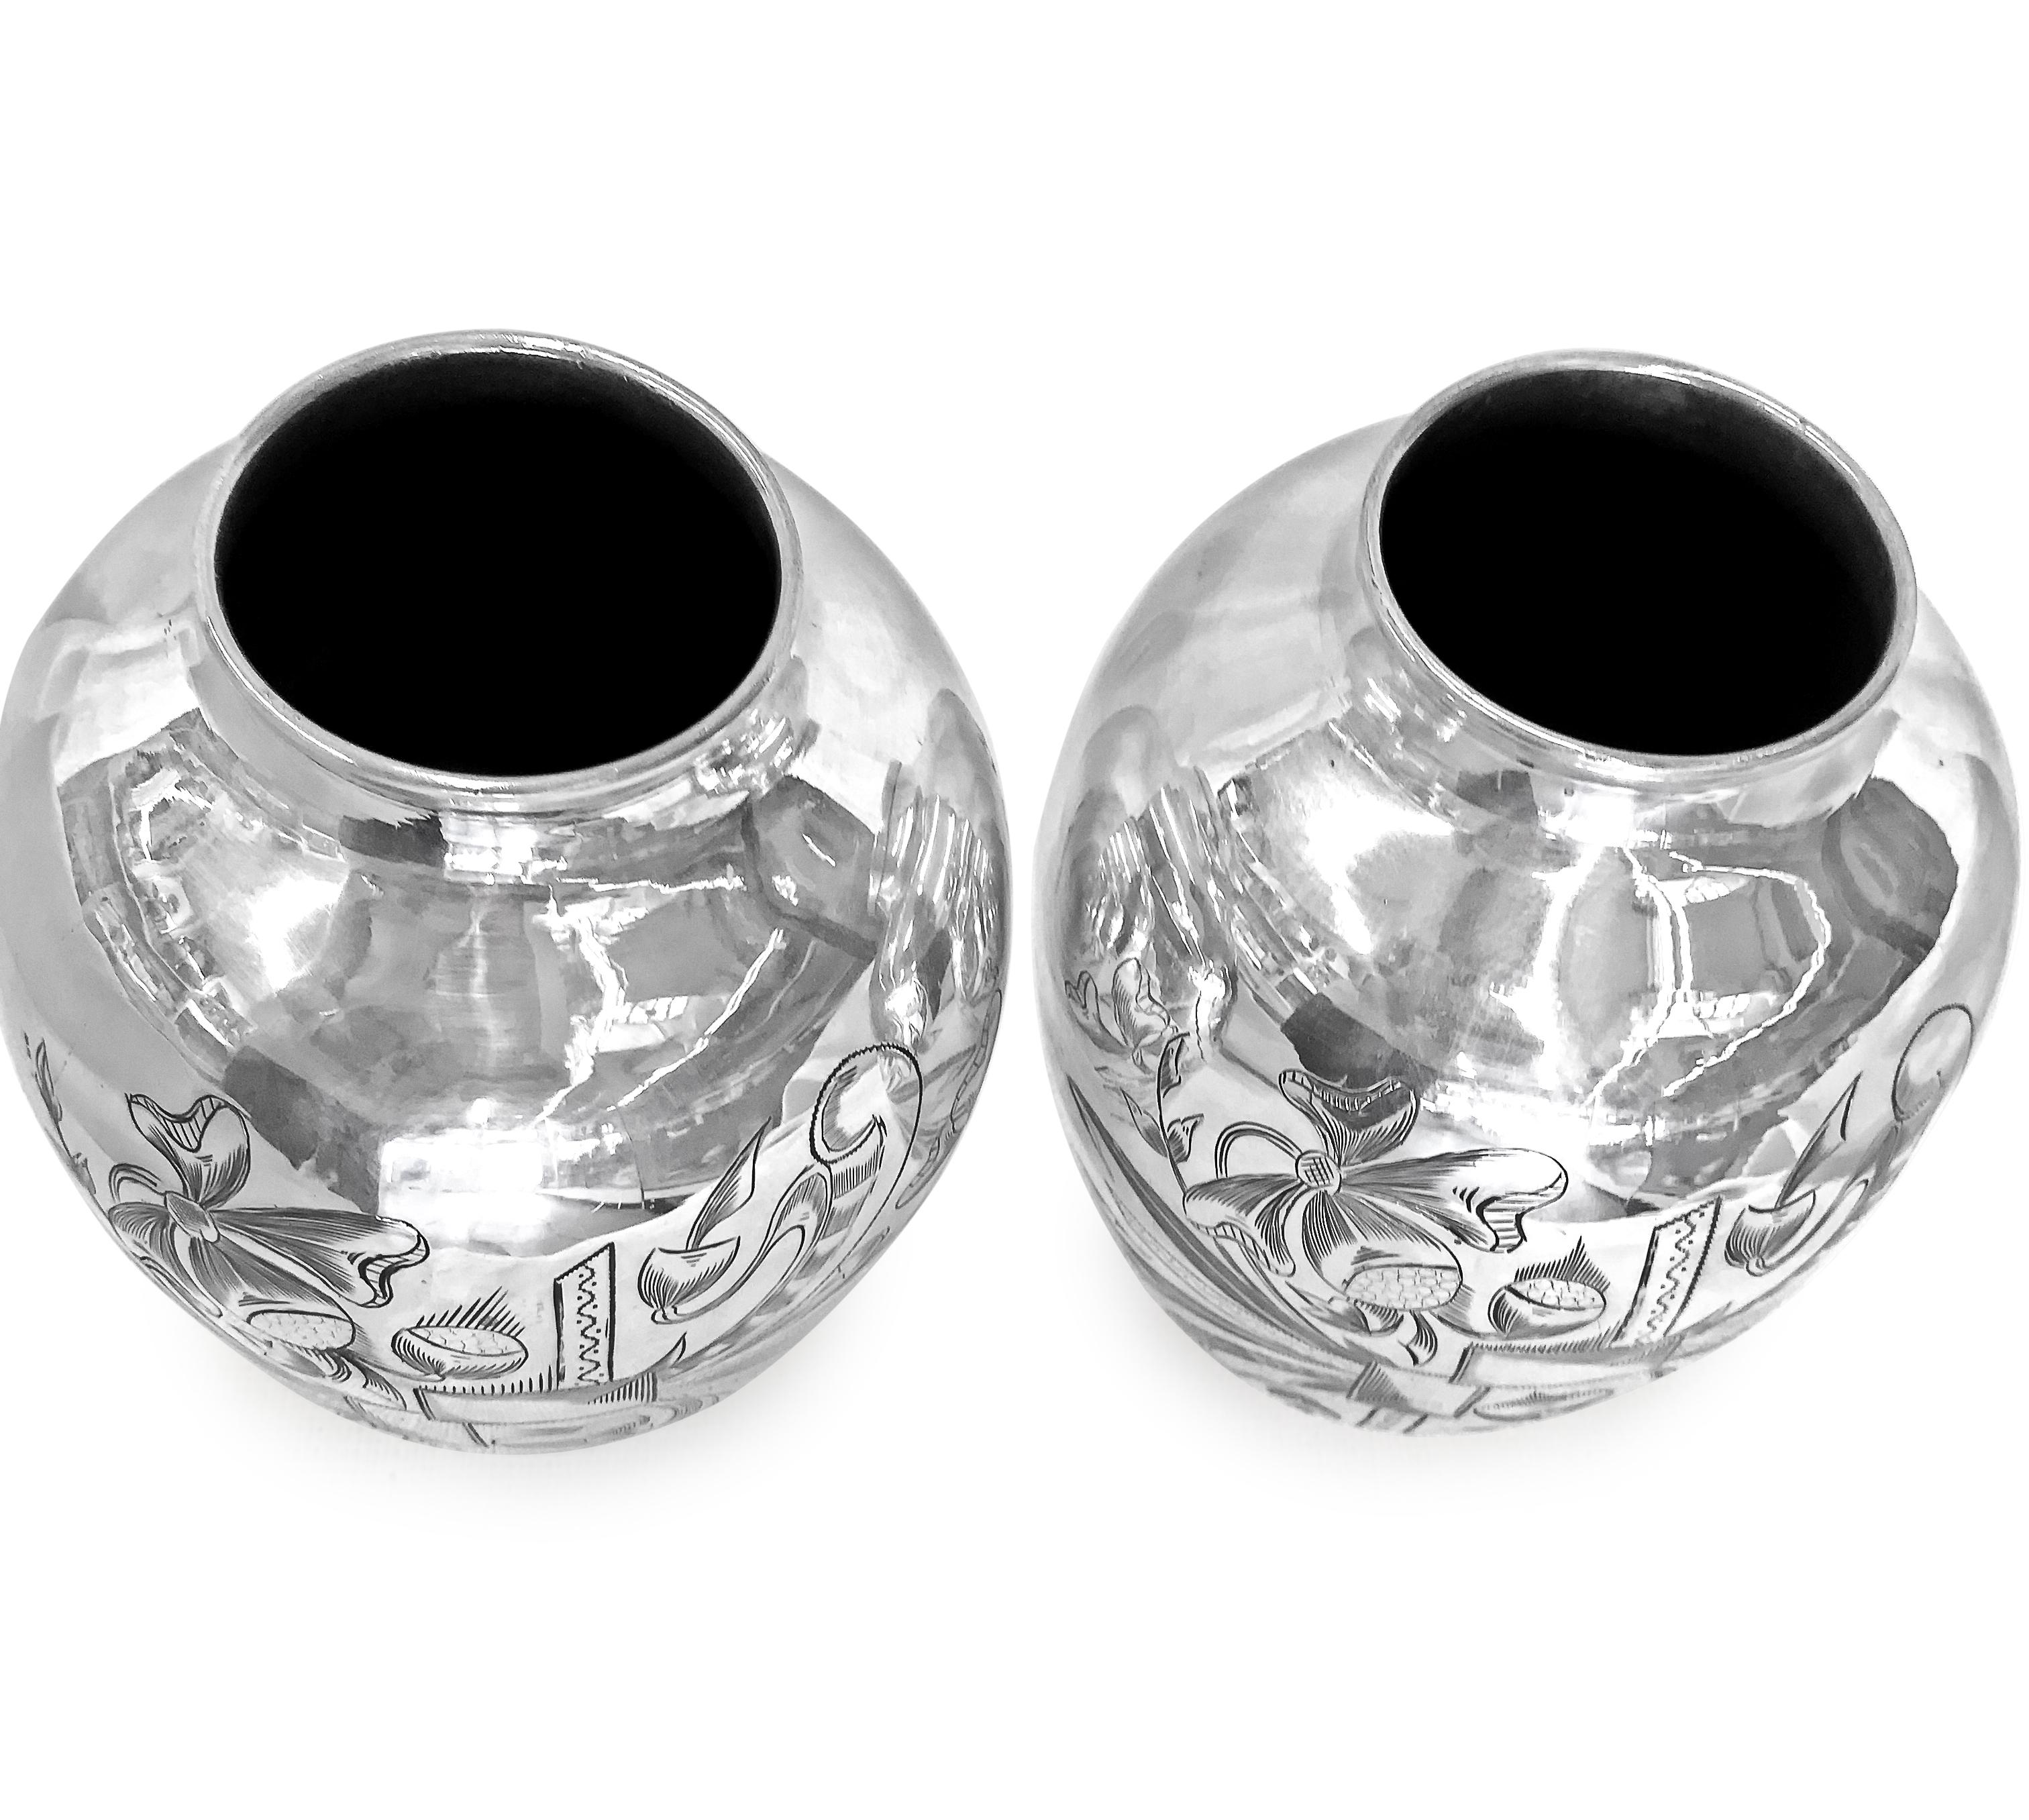 One pair rare Tabriz-Iran vases with gorgeous hand engraving.The unique kind of hand carved has made these pair very unique .The design is on both side the vase and looks like a big bow with heart and flower in there too.The rest of it its just